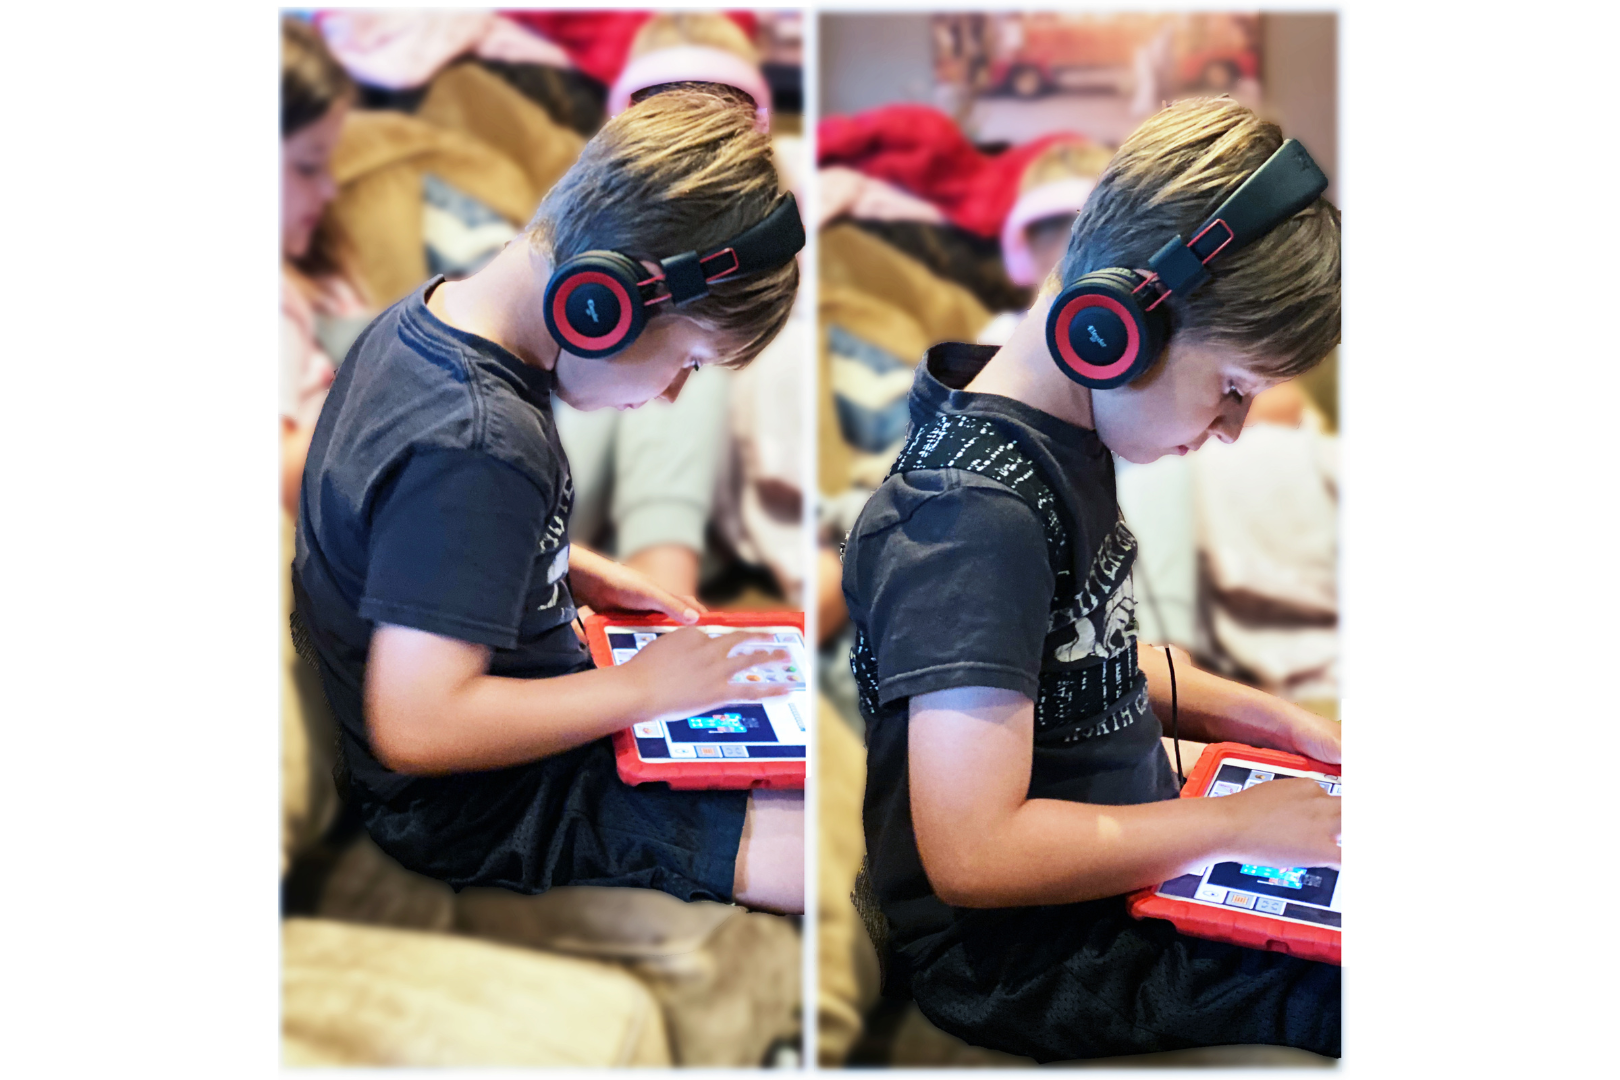 Child playing video games with bad posture